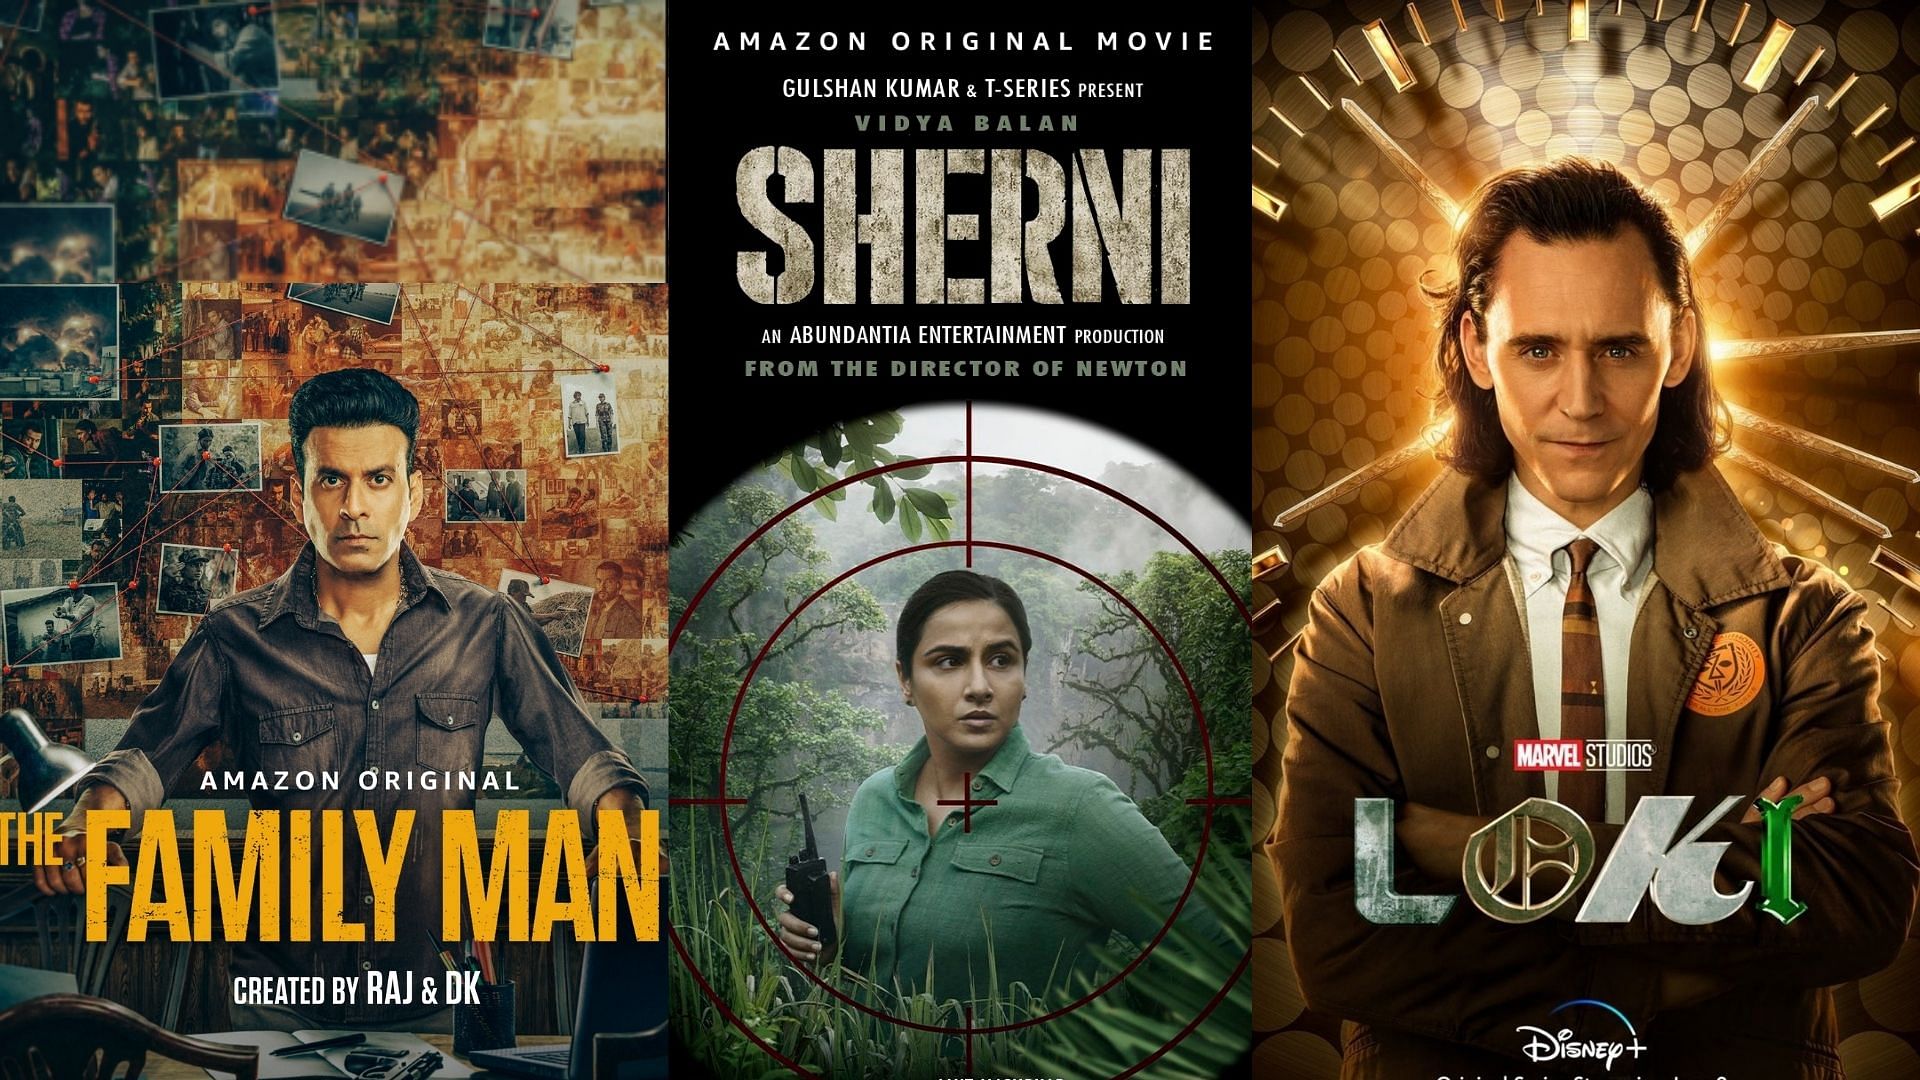 The Family Man Luca, Loki, Sherni: The Best New Films and Shows to Watch in June 2021. Amazon Prime, Disney+ Hotstar